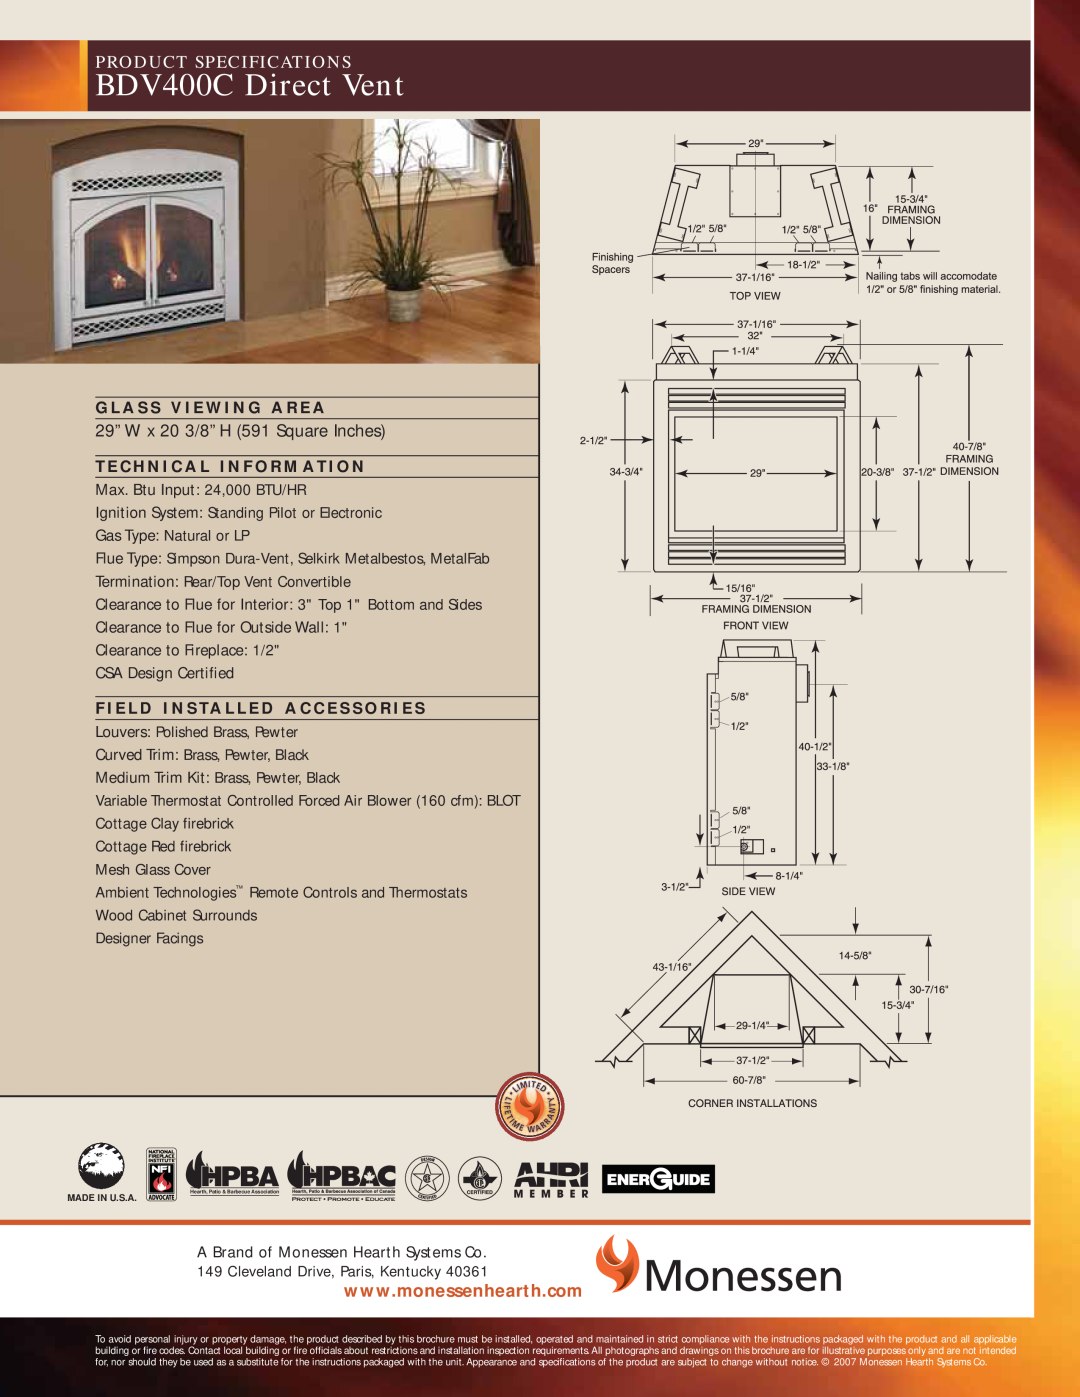 Monessen Hearth specifications BDV400C Direct Vent, Product Specifications 